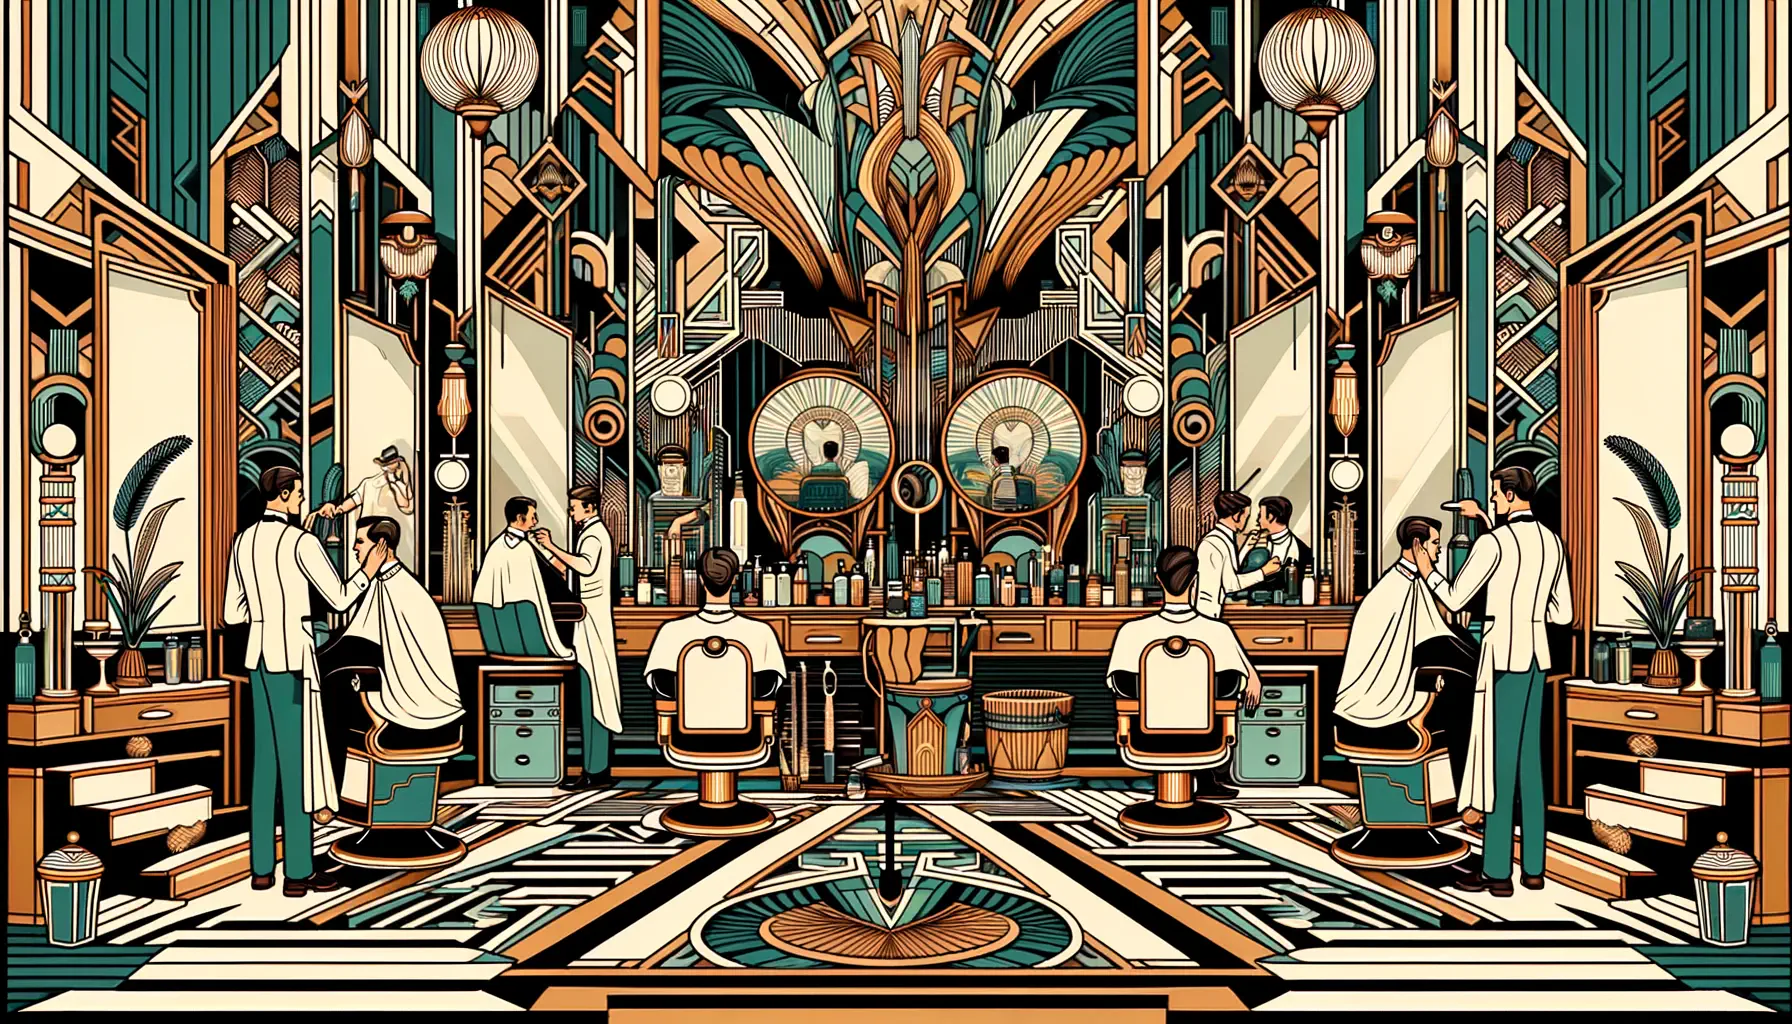 A picture of a barber in Art Deco style, showing some men getting their hair cut and faces shaved.